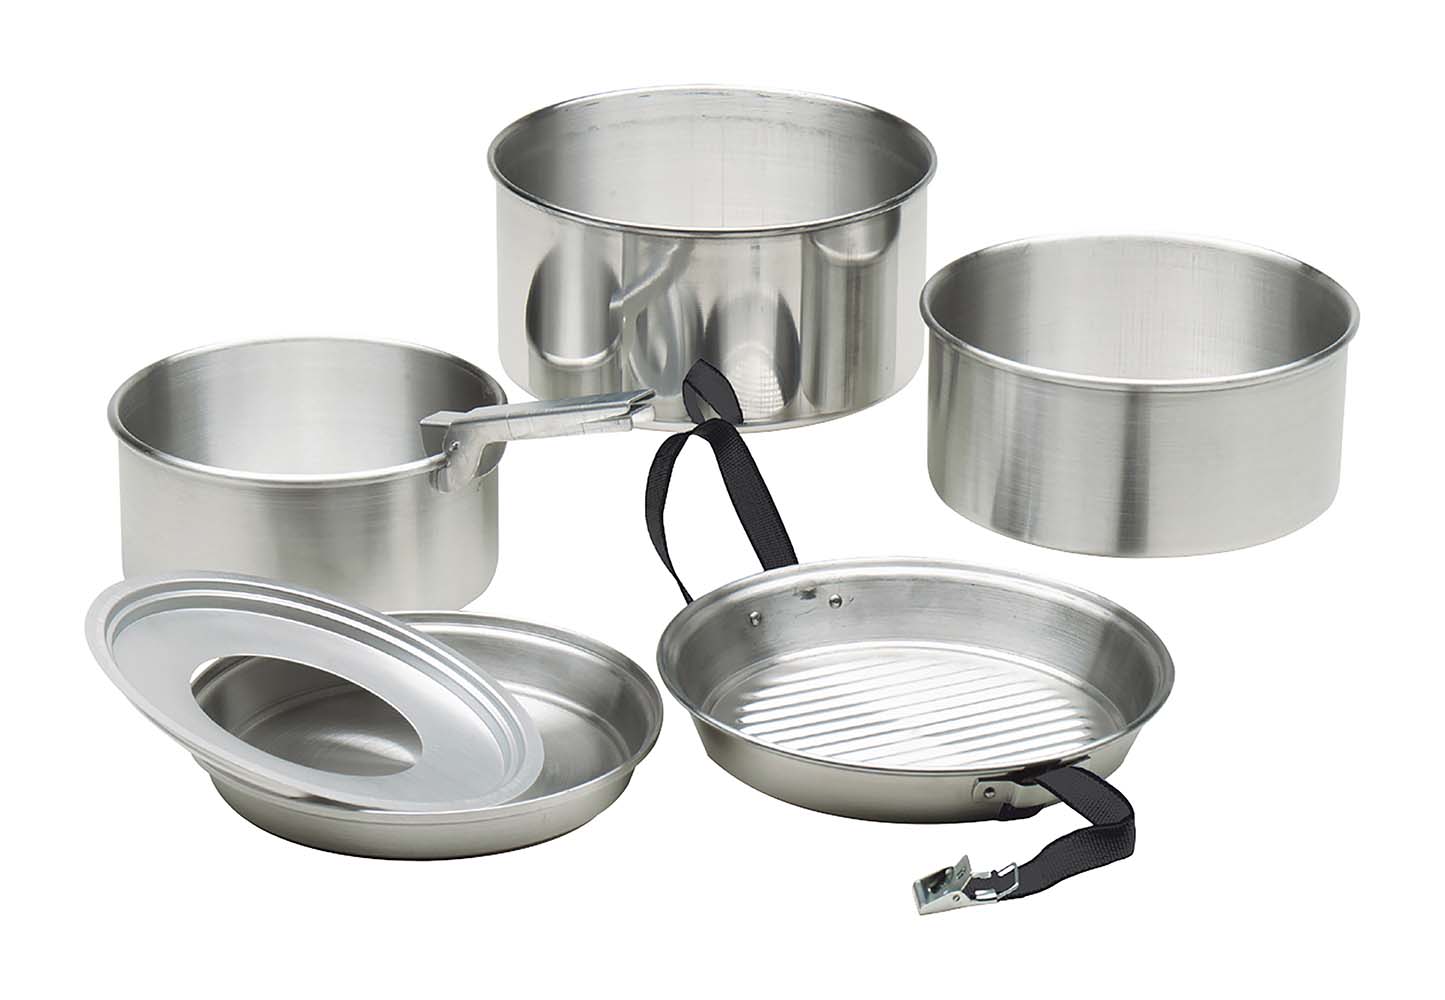 2200150 Complete 7-part light weight cookware set. The set consists of 3 sauce pans, 2 frying pans, a stacking ring and a pot handle. Made from sturdy and light weight aluminium These aluminium pans can be used on gas, ceramic and electrical heat sources. This set is fully nestable and can be attached by means of the supplied strap.